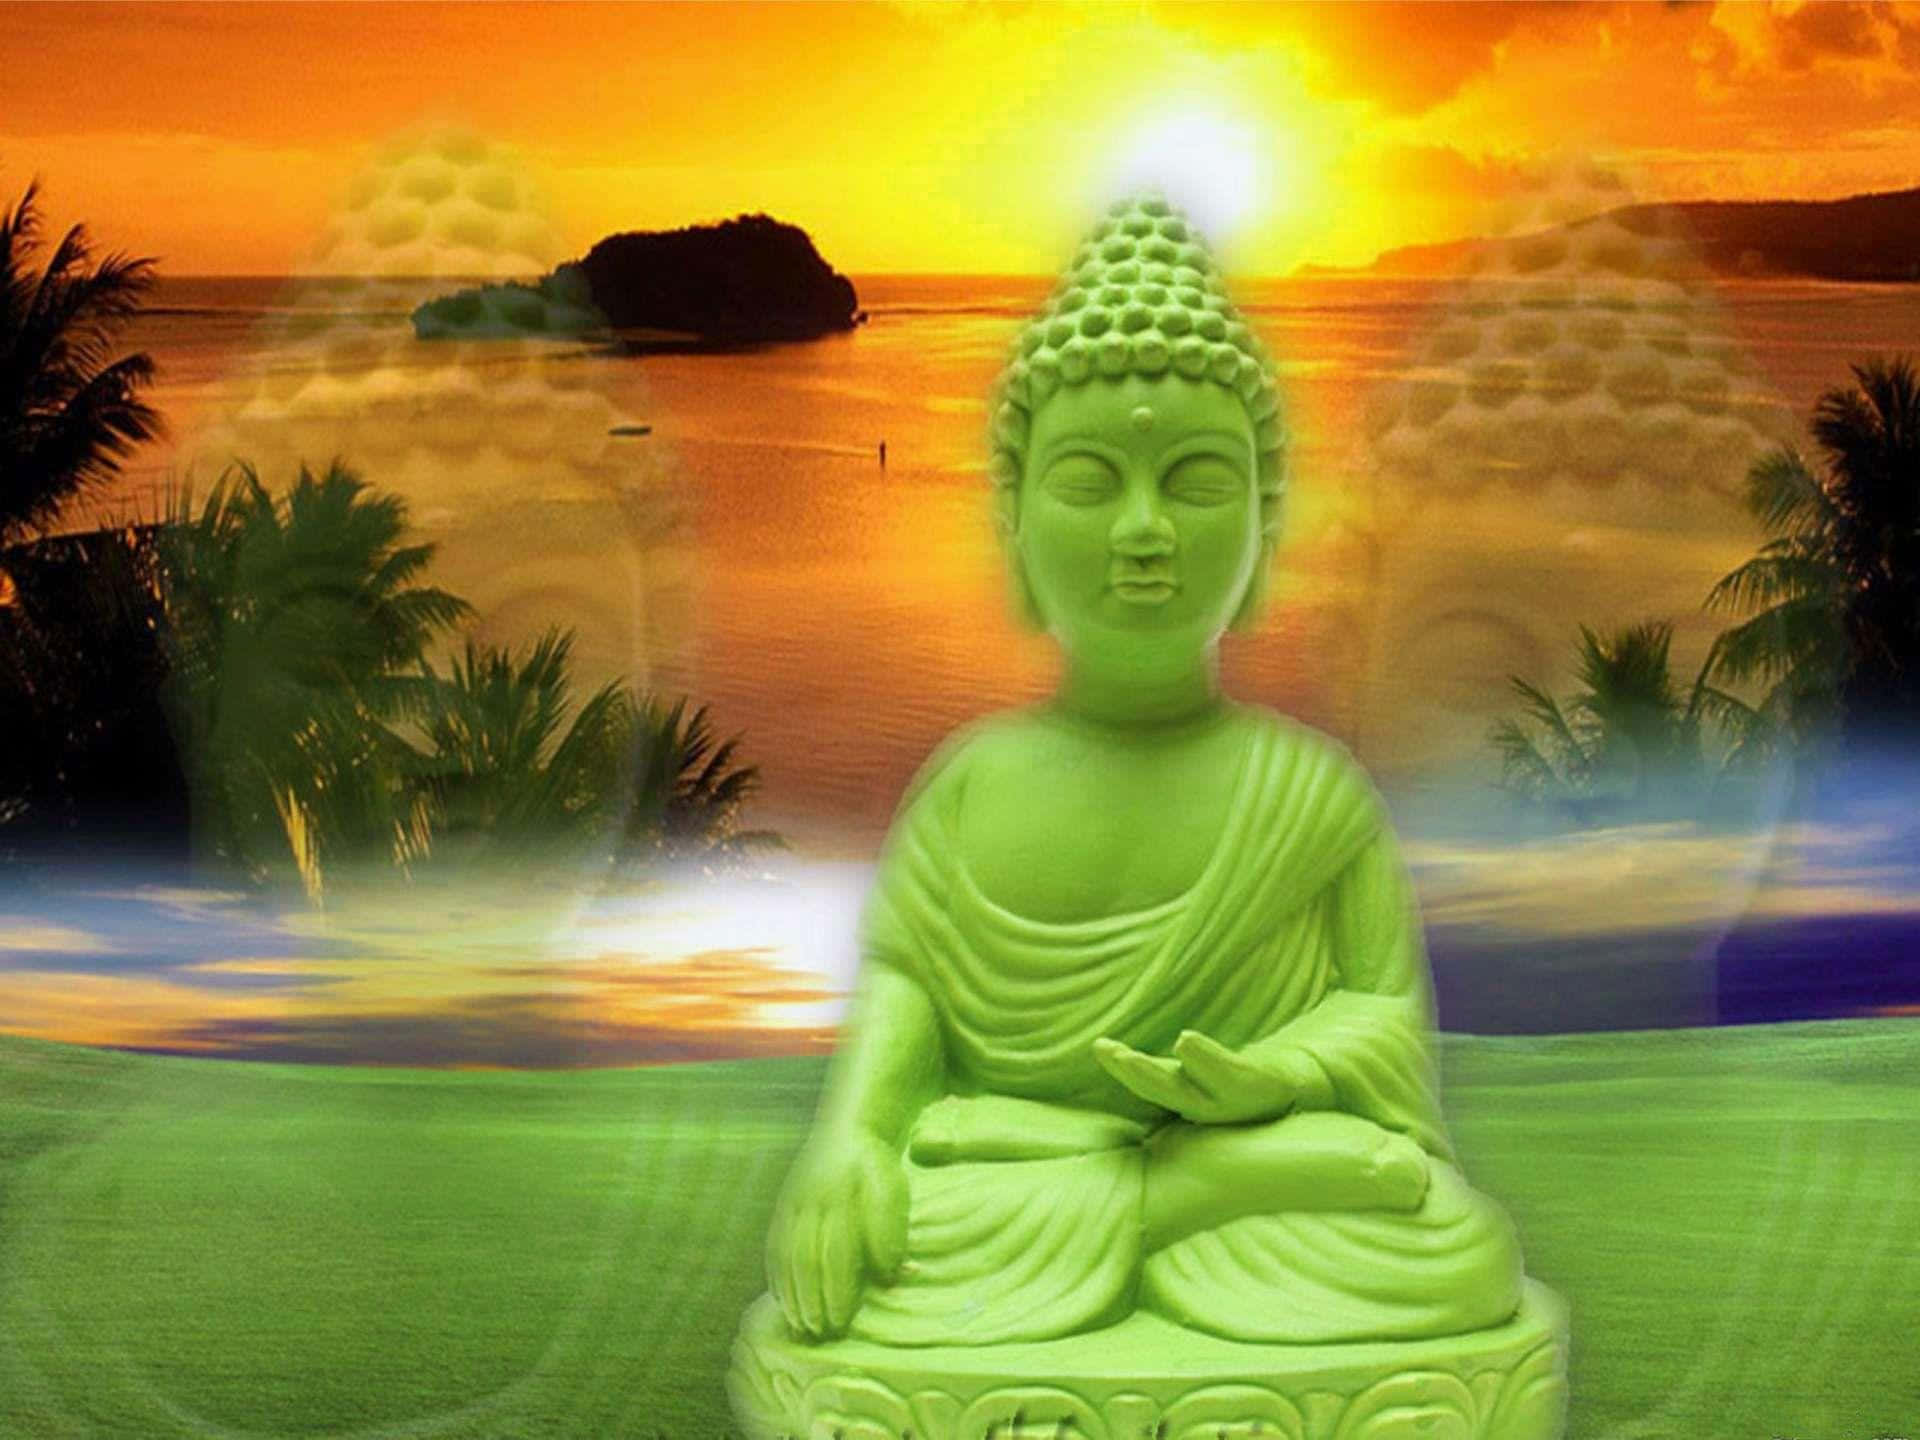 A Green Buddha Statue Is Sitting On A Green Grass